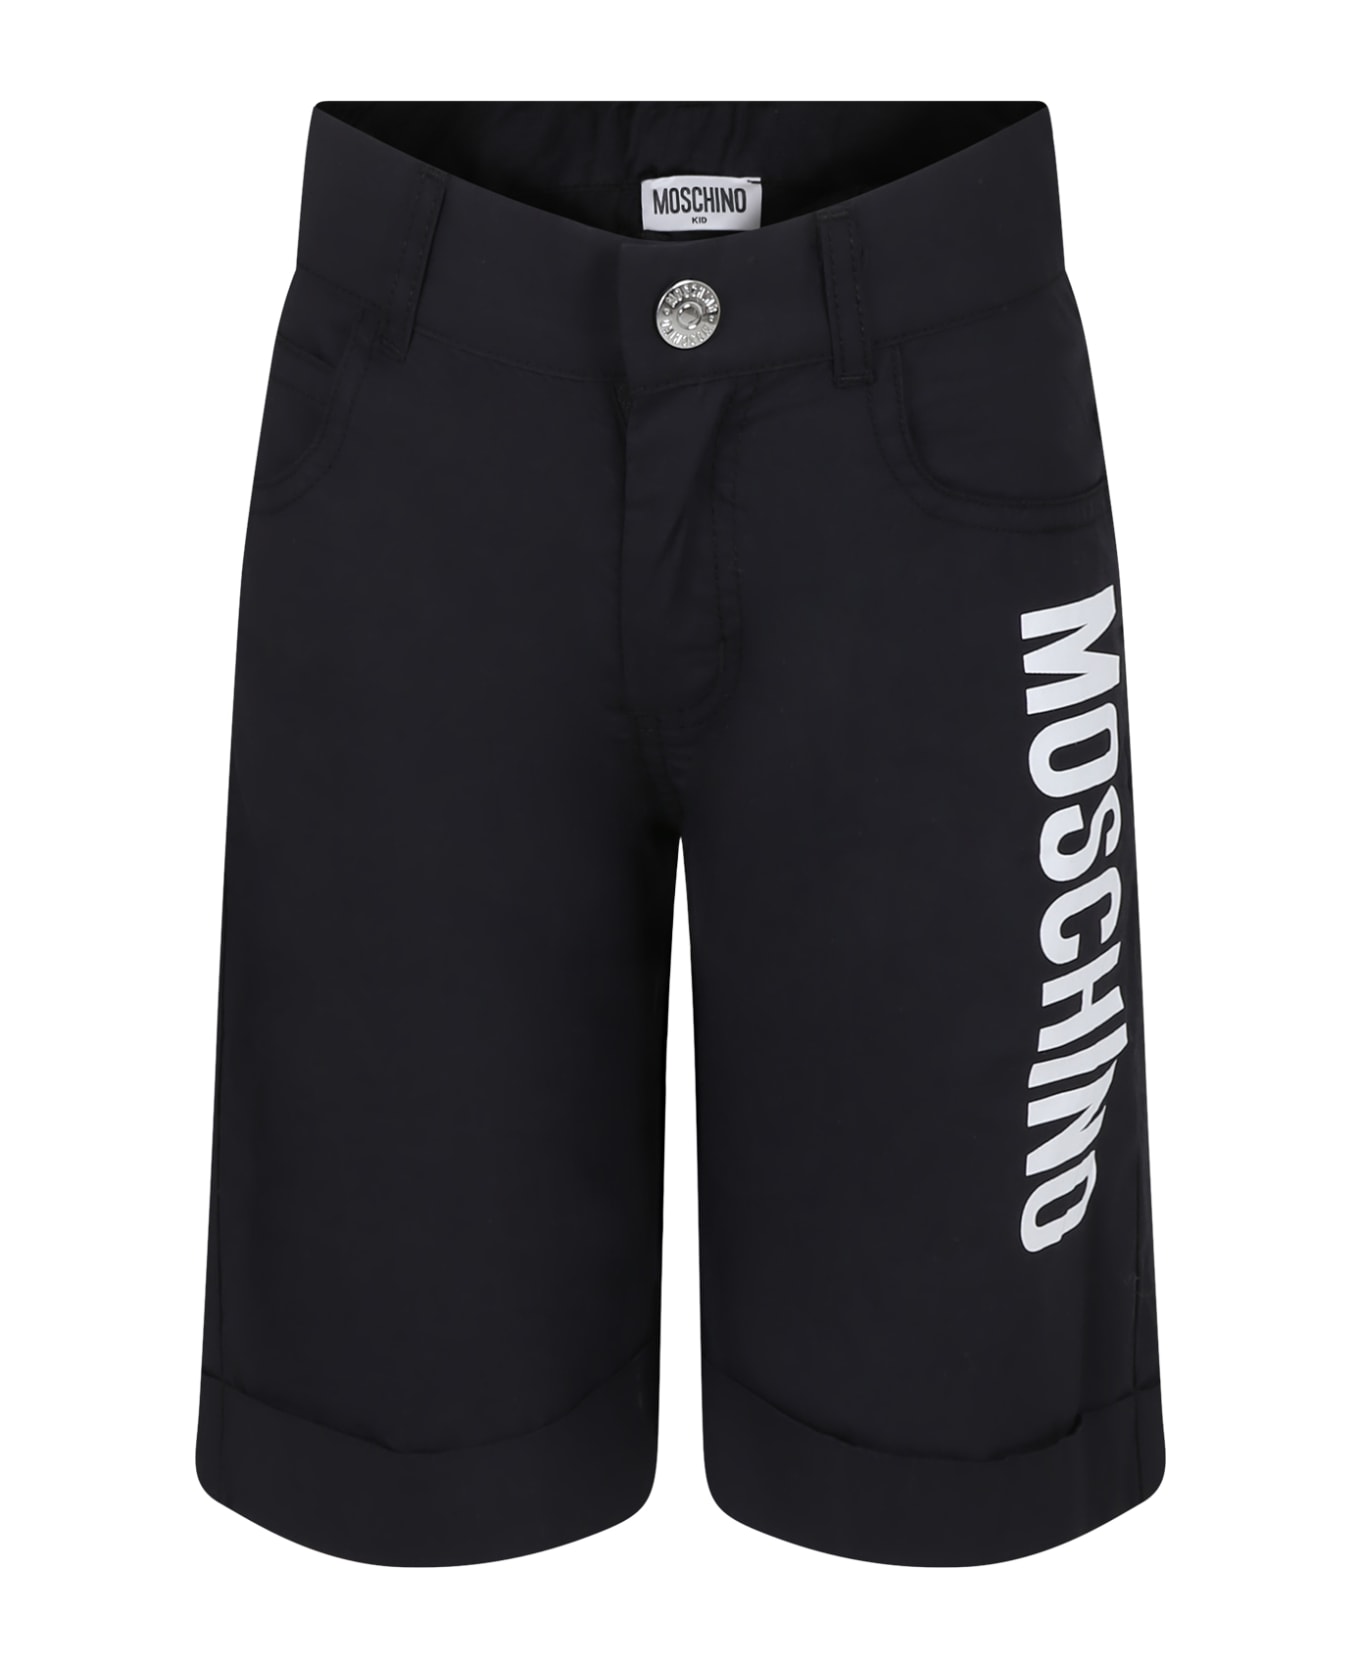 Moschino Black Shorts For Kids With Logo - Black